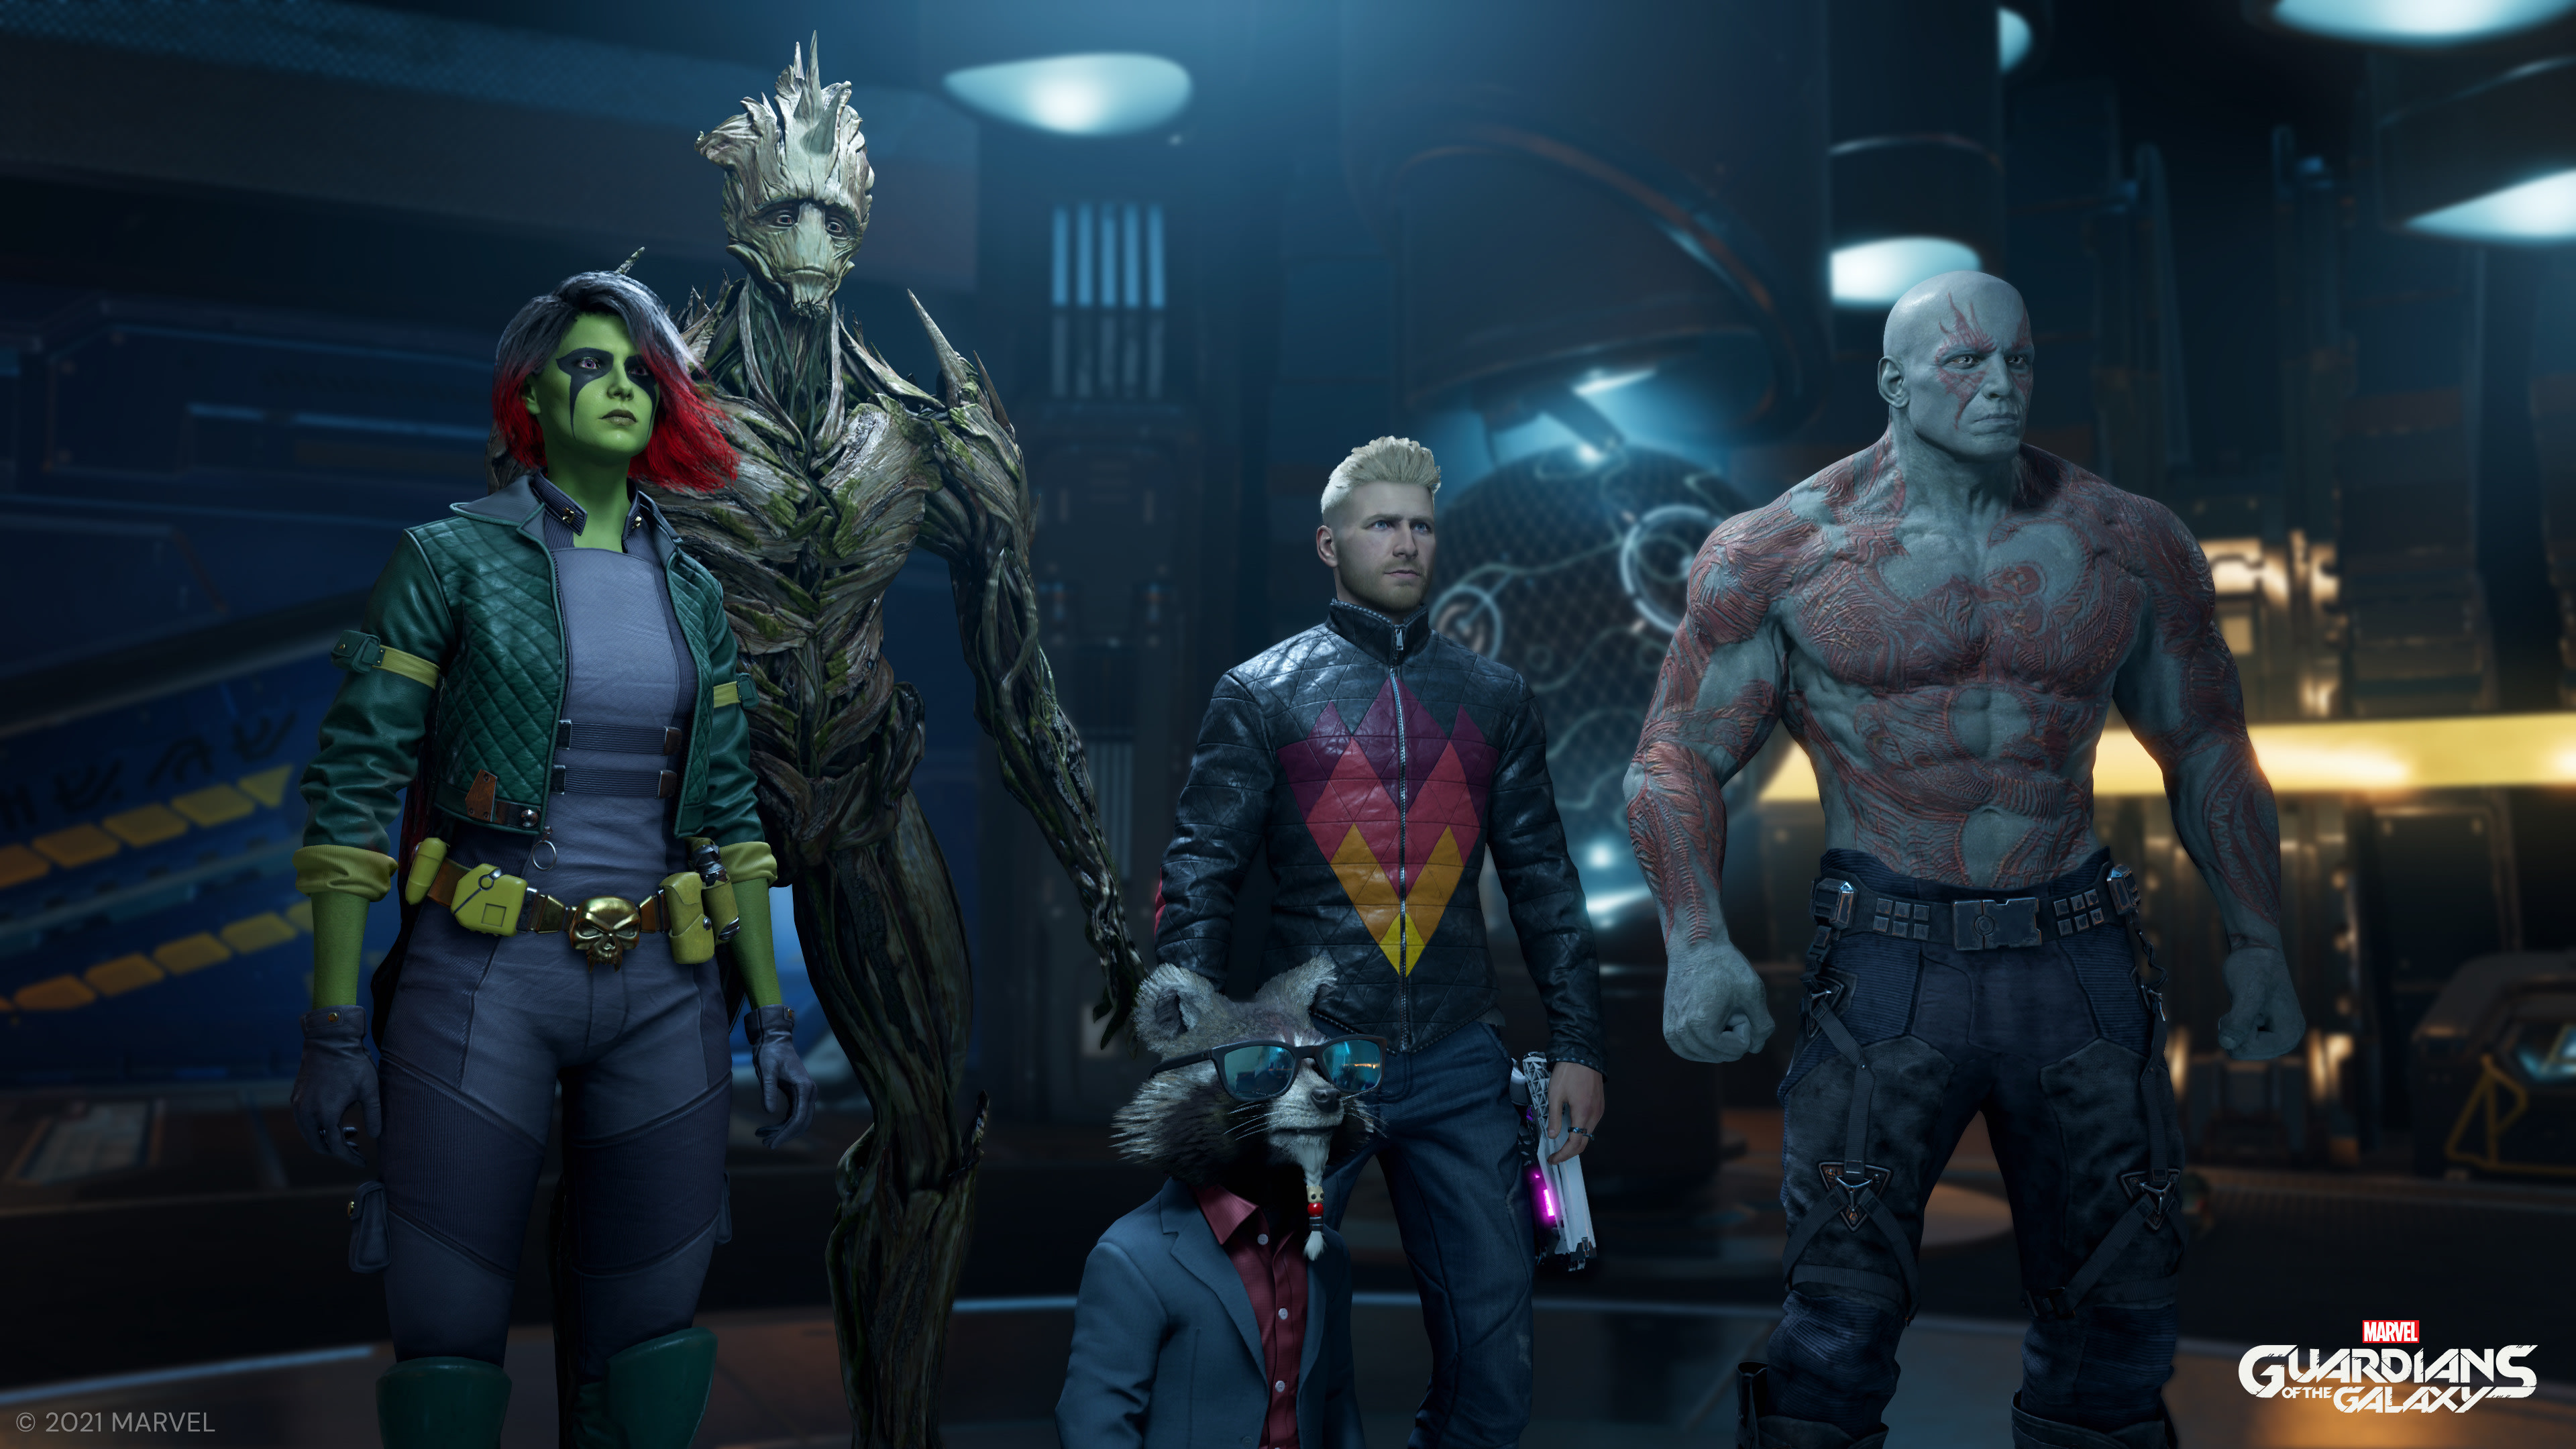 video game, marvel's guardians of the galaxy, drax the destroyer, gamora, groot, rocket raccoon